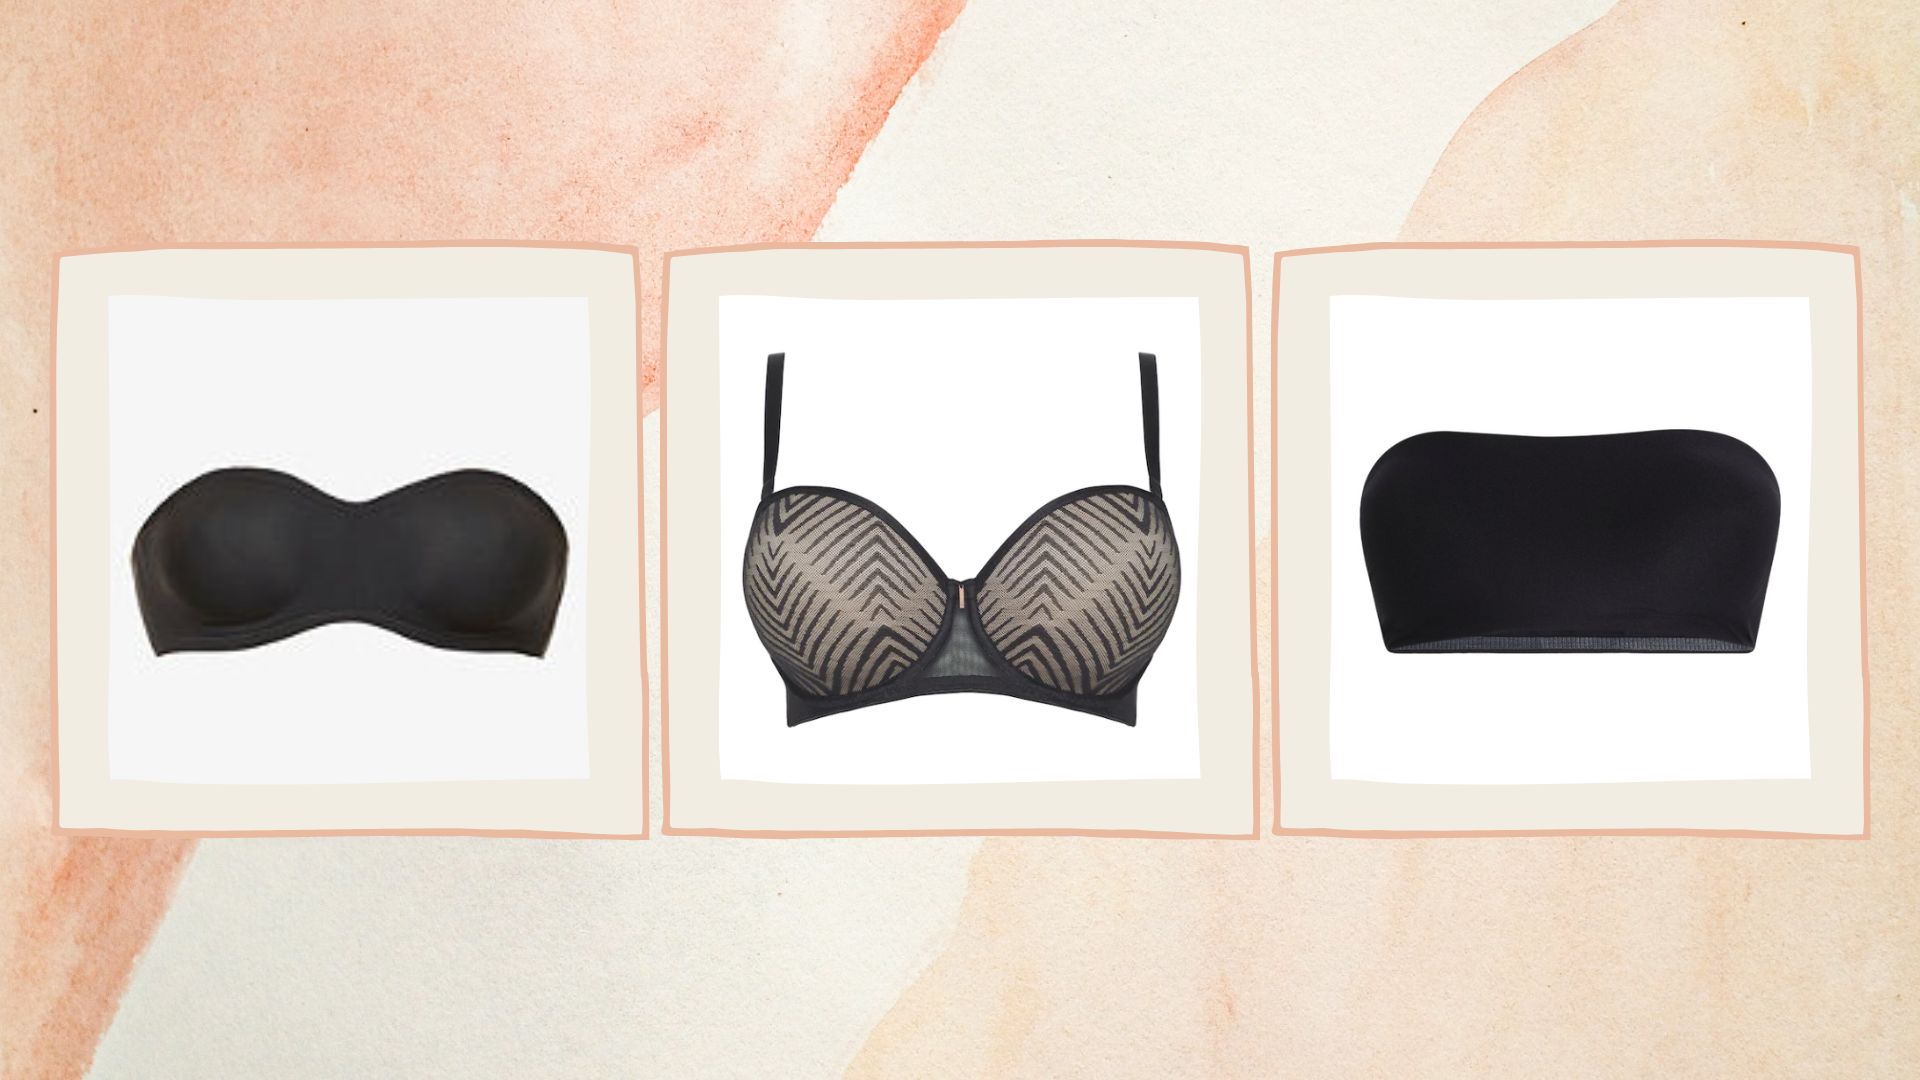 Best strapless bras 2022: Bras for all chest sizes that actually stay up